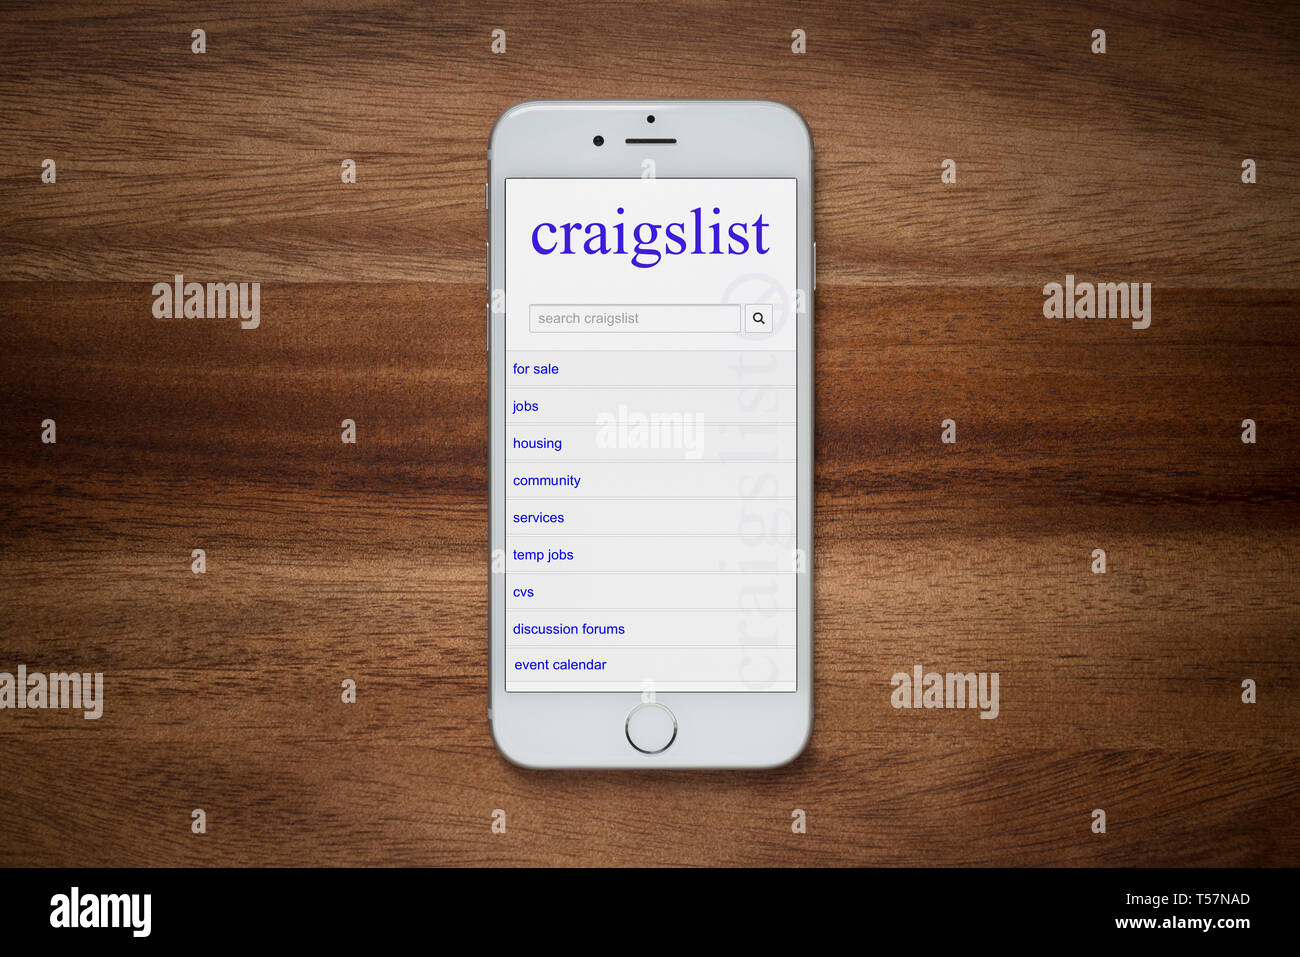 https://c8.alamy.com/comp/T57NAD/an-iphone-showing-the-craigslist-website-rests-on-a-plain-wooden-table-editorial-use-only-T57NAD.jpg